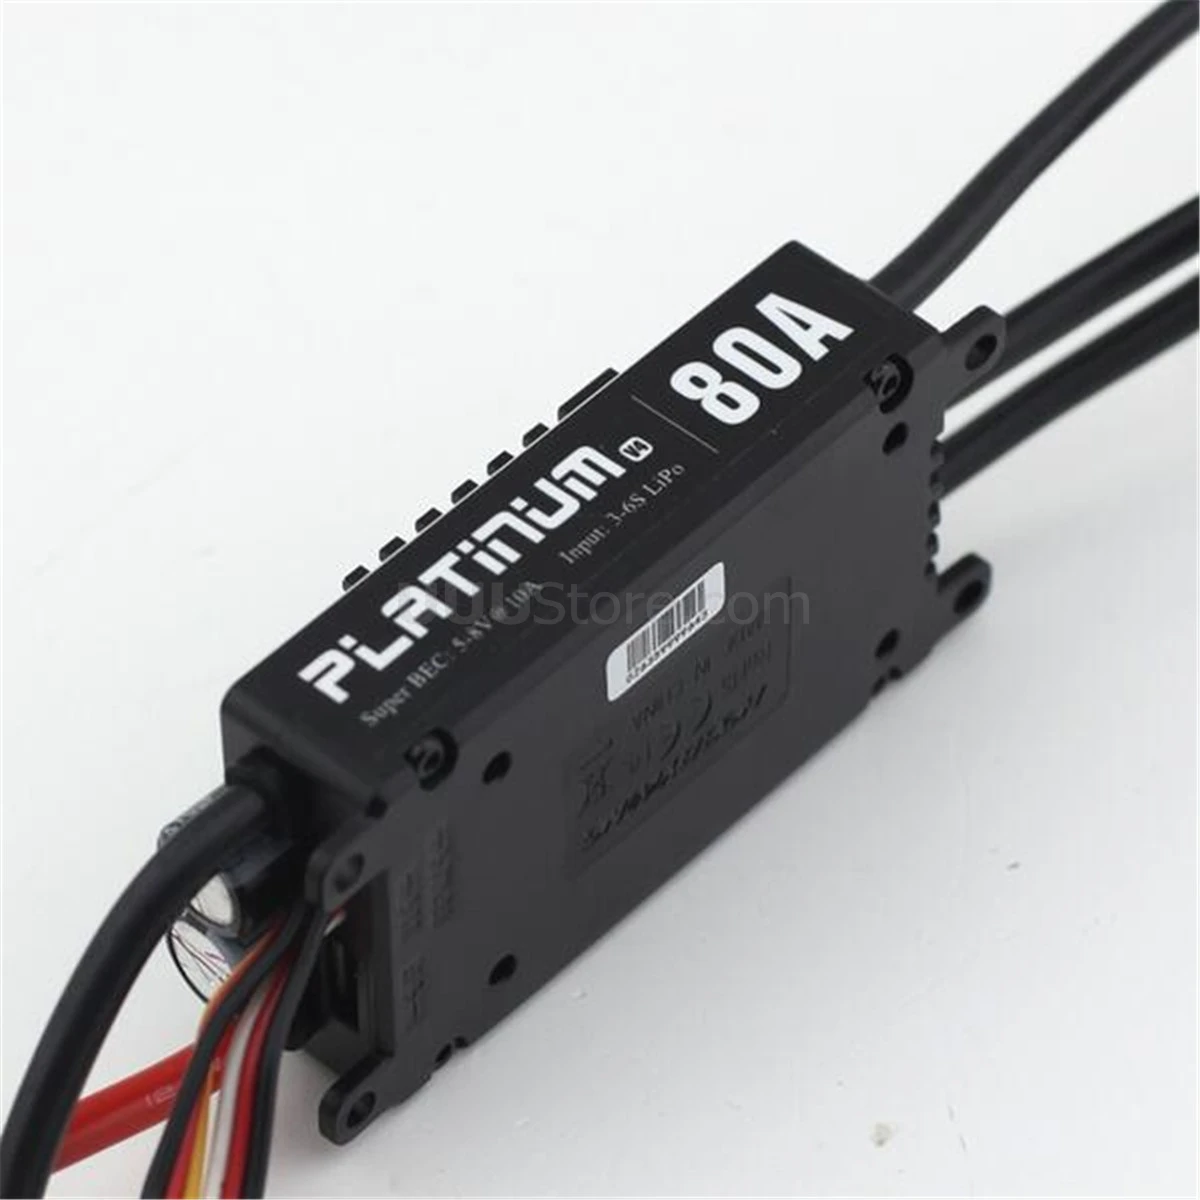 HobbyWing Platinum 80A V4 ESC 3S-6S BEC 5-8V 10A for 450L-500 Class Heli RC Drone Aircraft Helicopter 4